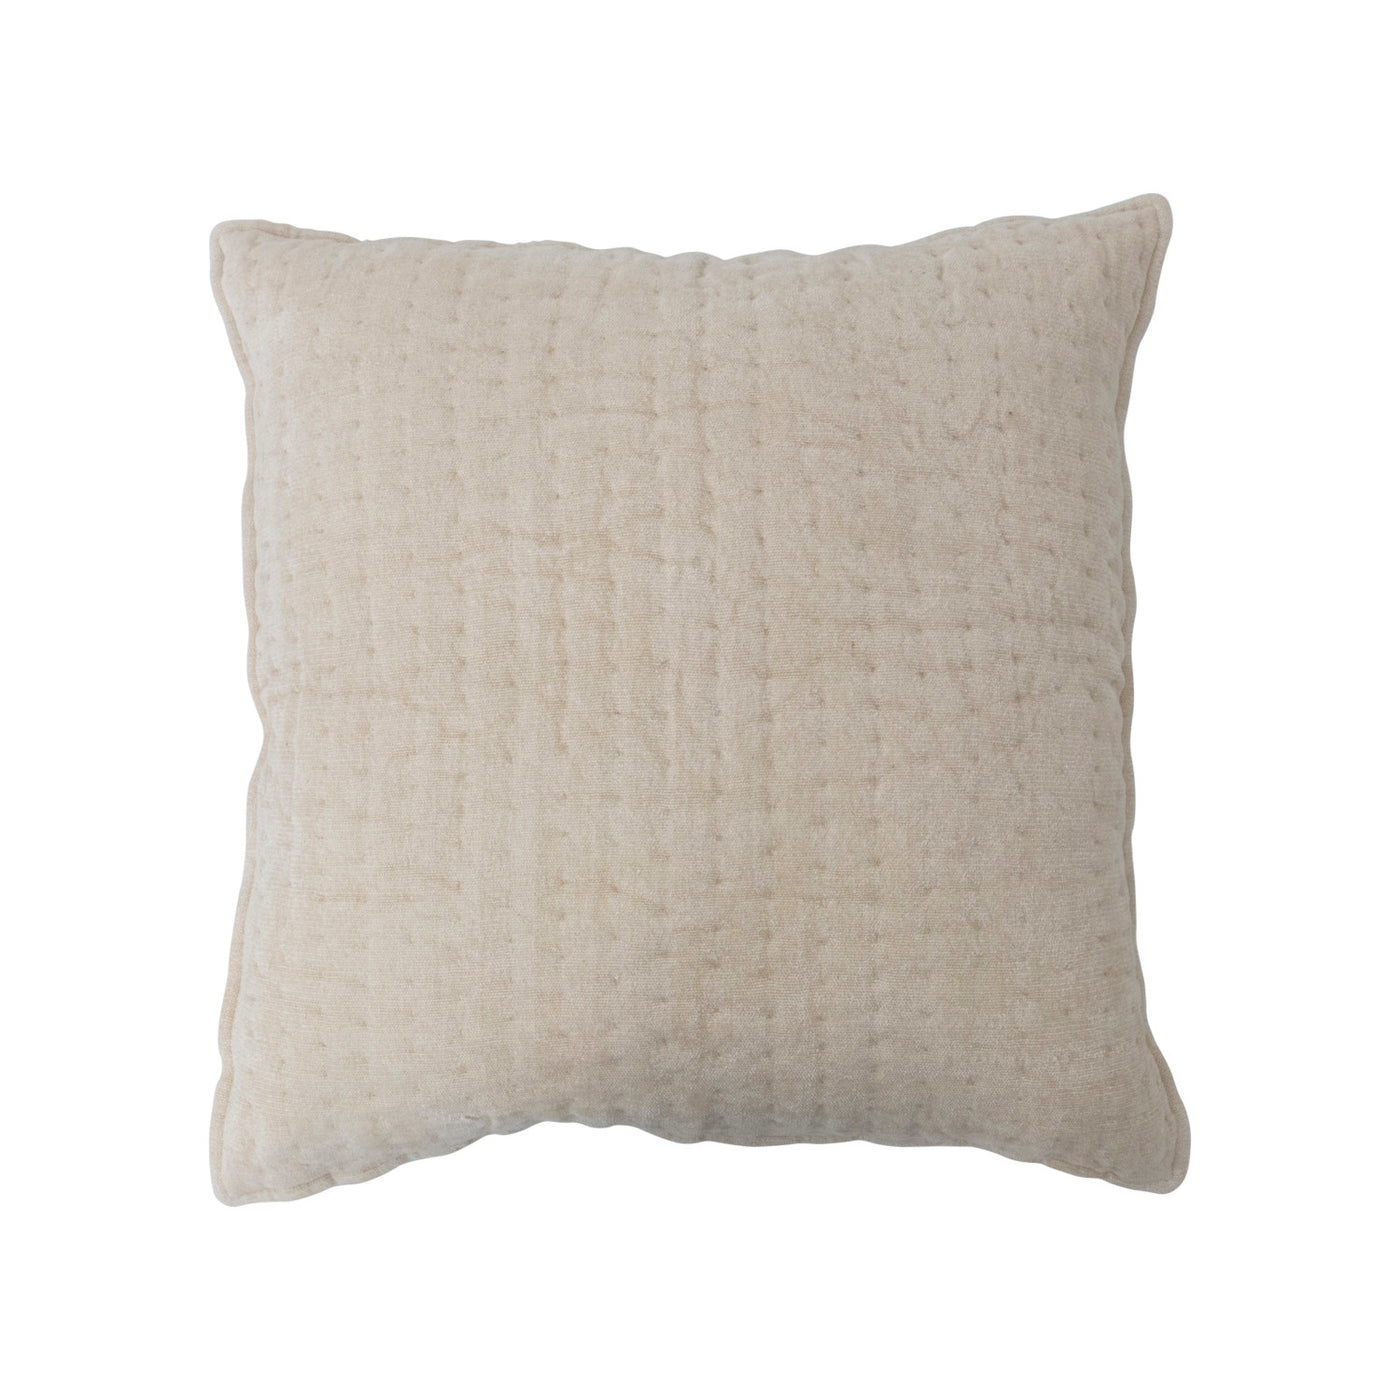 20" Quilted Pillow